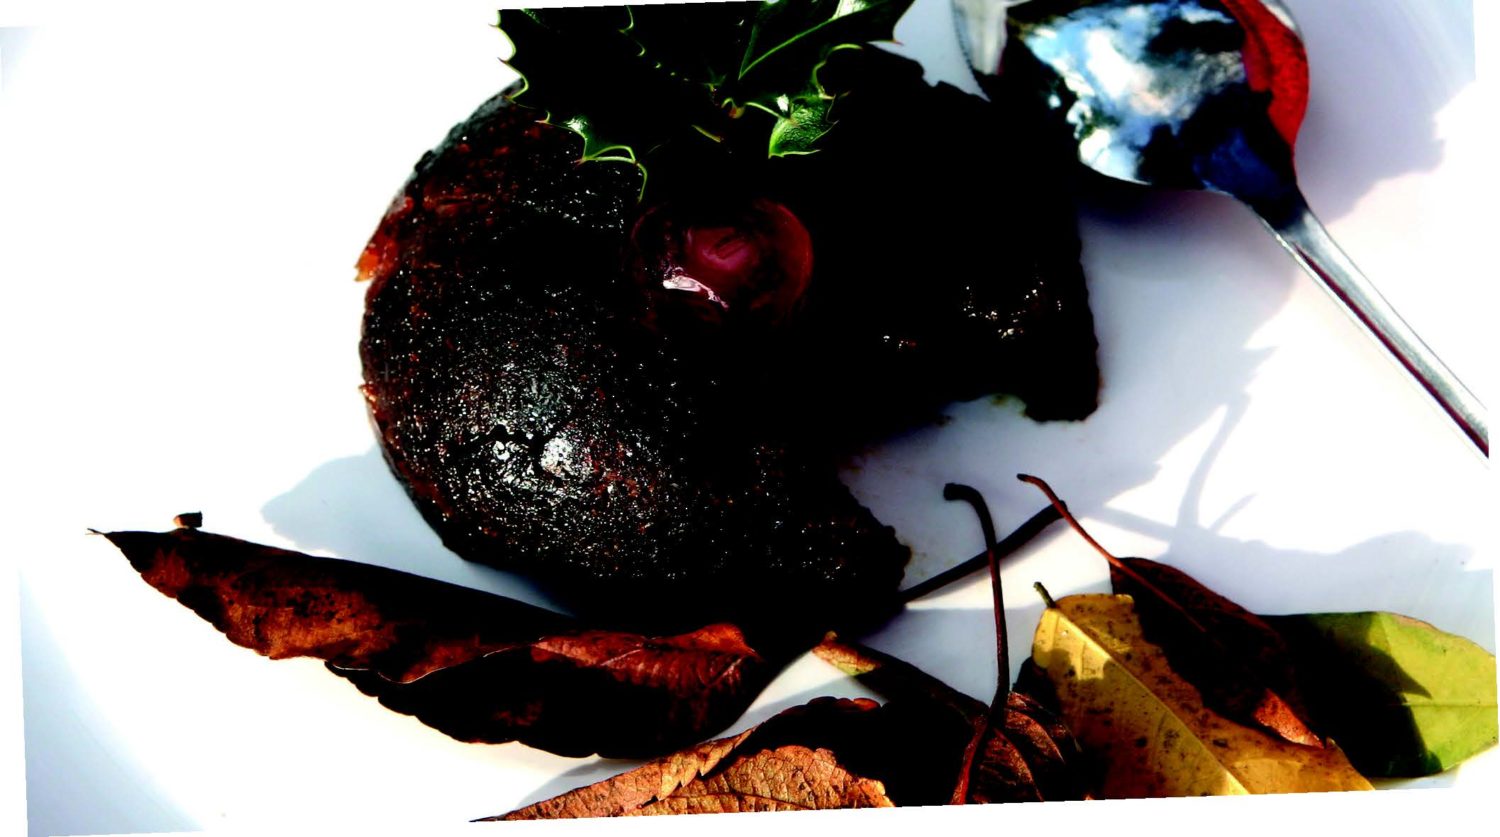 Chocolate Christmas Pudding Recipe from the Capital Region Farmers Market in Canberra